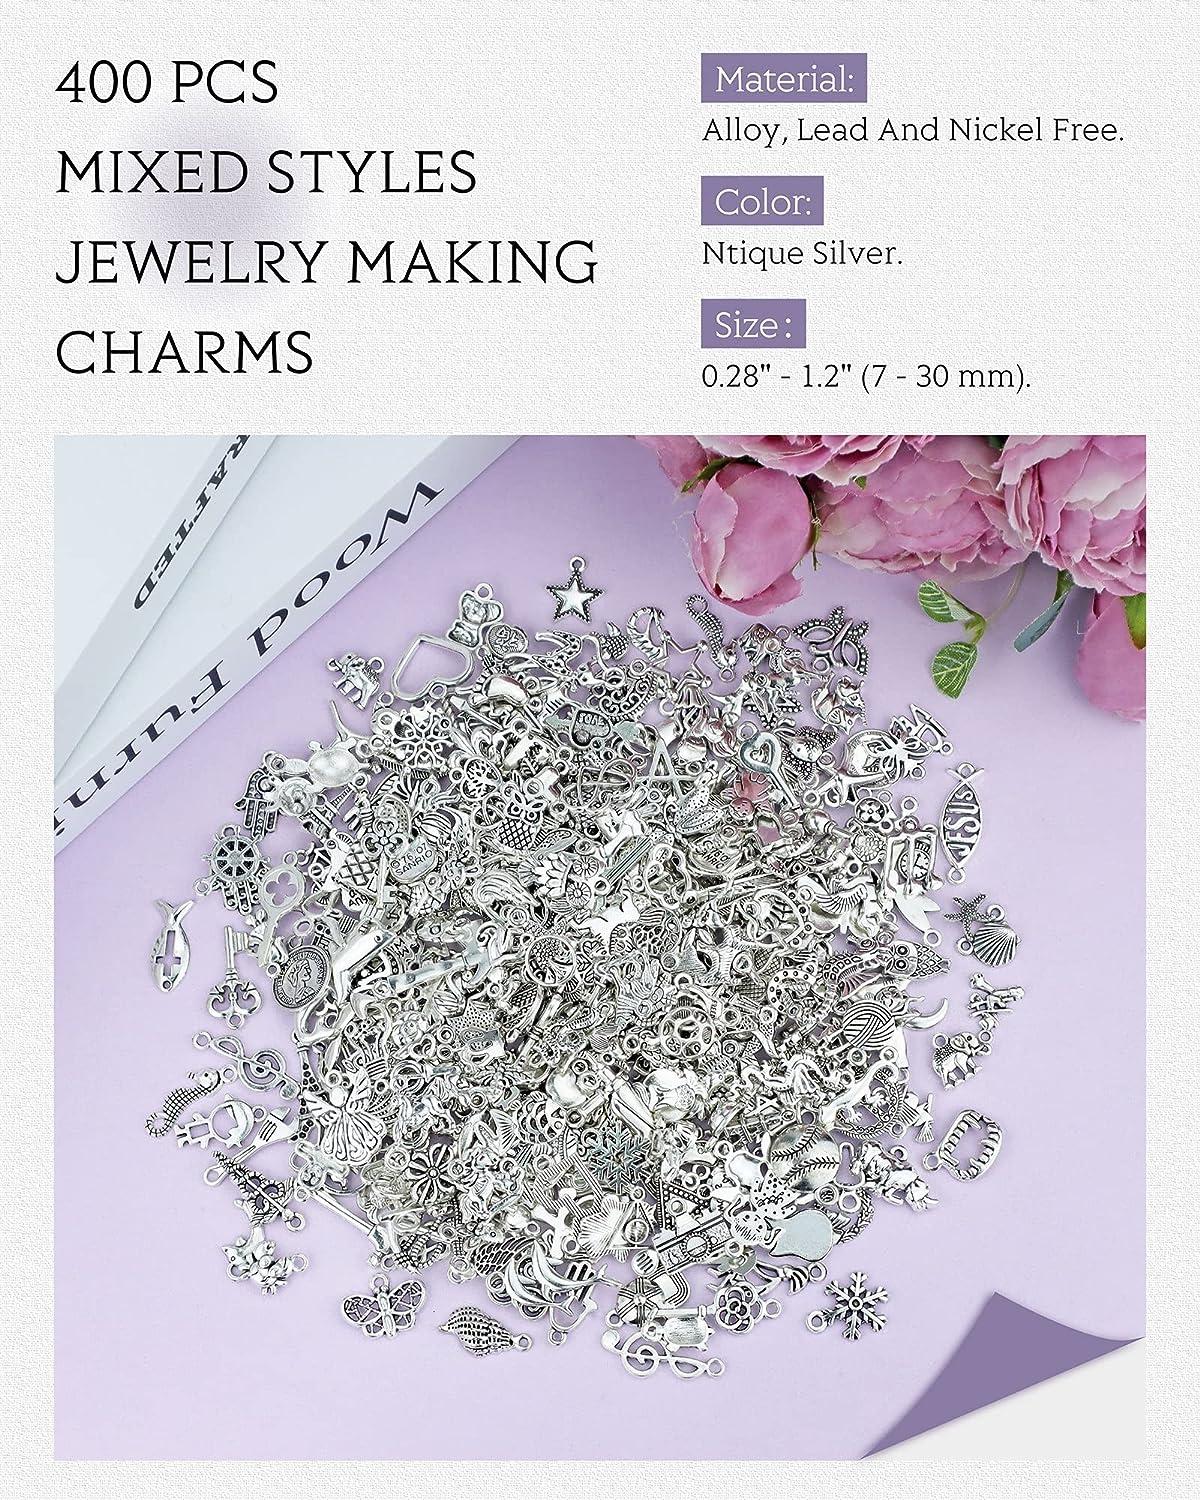 JIALEEY 400 PCS Wholesale Bulk Lots Jewelry Making Charms Mixed Smooth  Tibetan Silver Alloy Charms Pendants DIY for Bracelet Necklace Jewelry  Making and Crafting